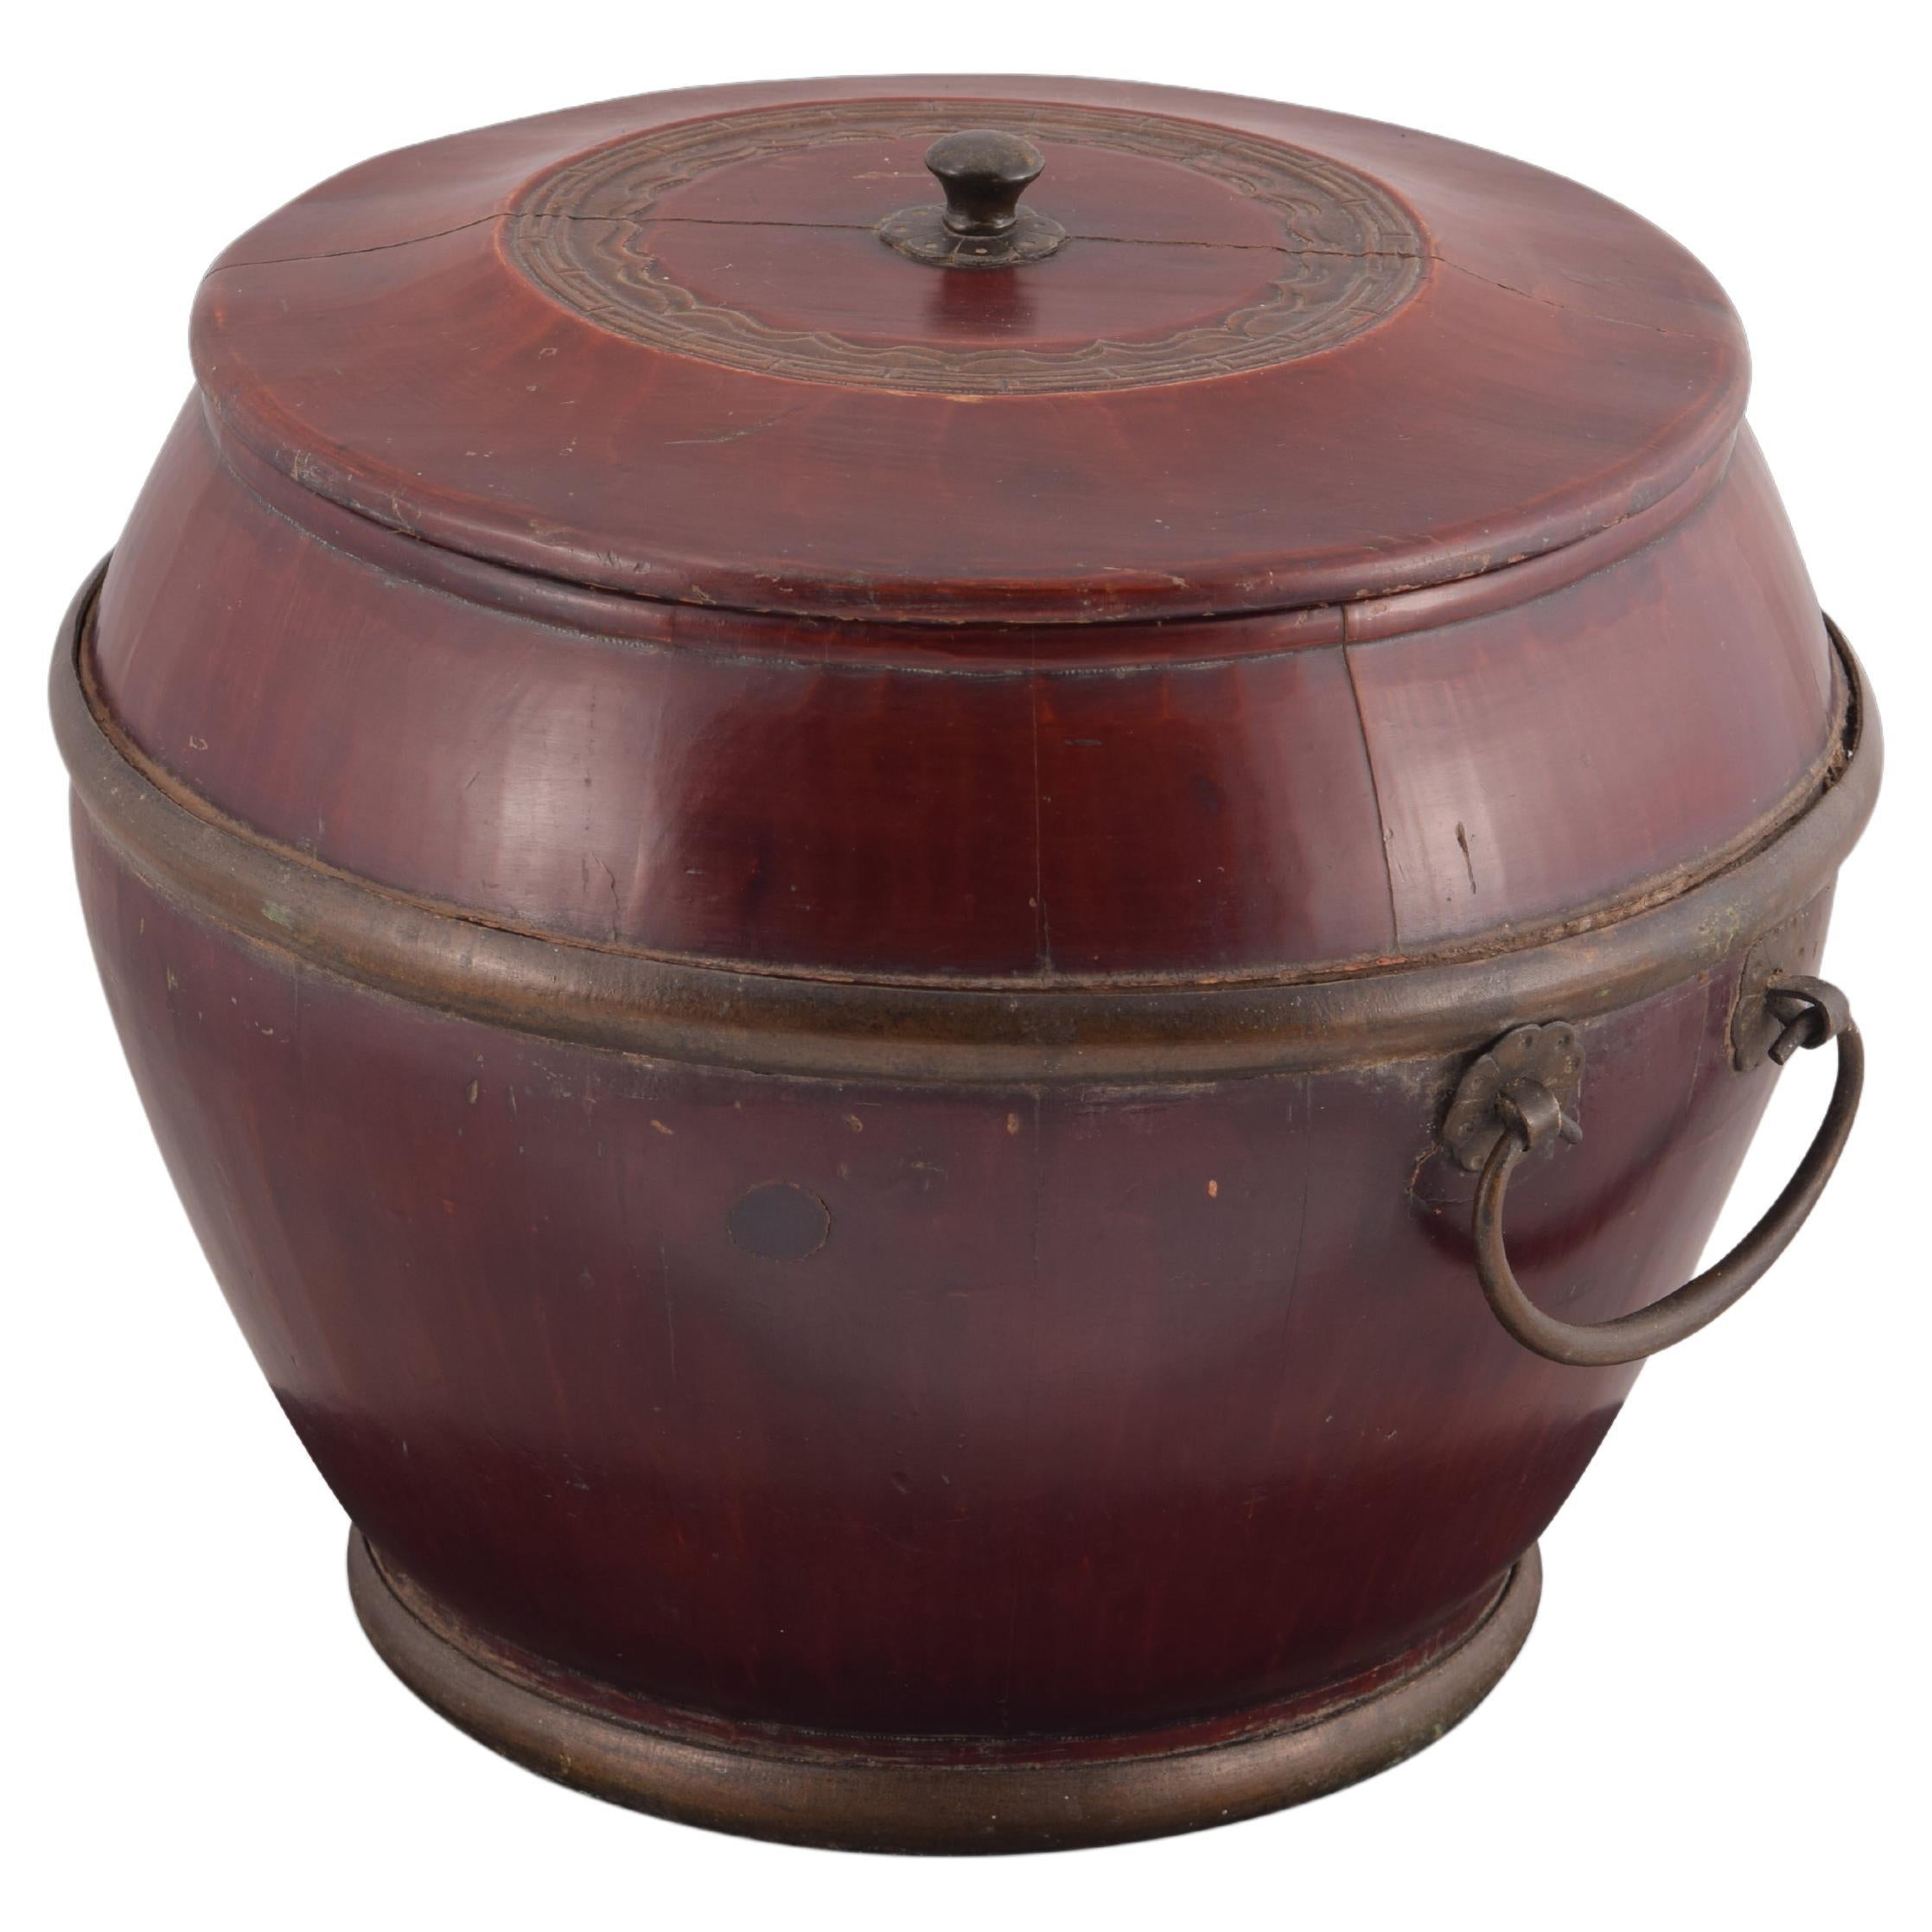 Oriental container for rice. Wood and metal. China, circa early 20th century.